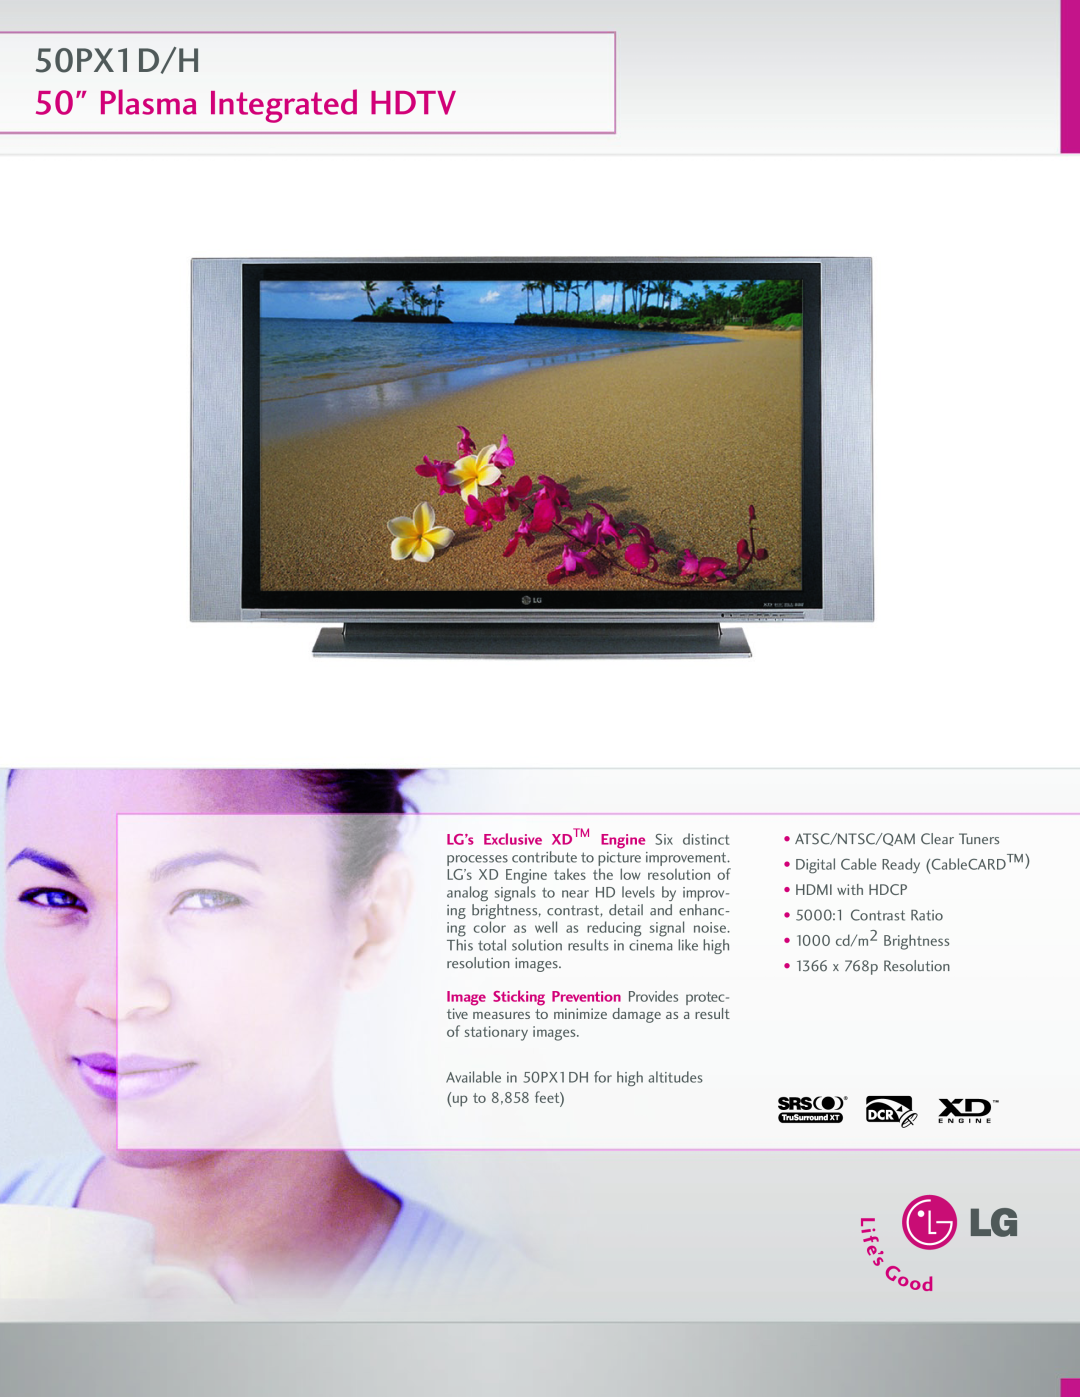 LG Electronics 50PX1H manual 50PX1D/H, Plasma Integrated HDTV, Available in 50PX1DH for high altitudes up to 8,858 feet 